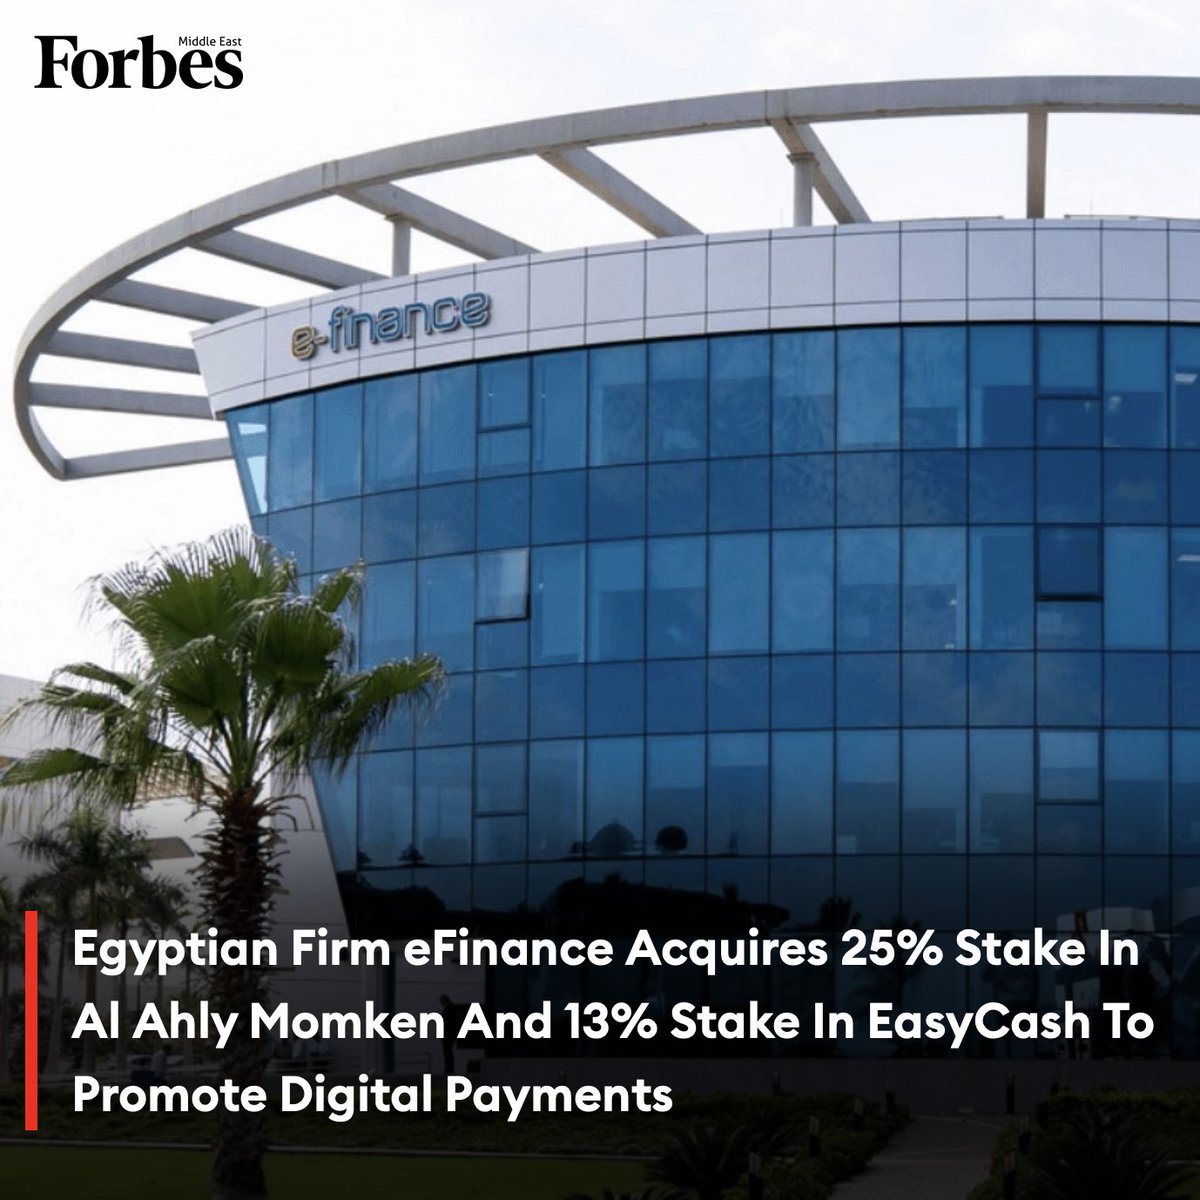 #Egypt-based #fintech firm eFinance has acquired a 25% stake in Al Ahly Momken and a 13% stake in EasyCash to facilitate digital payments and further the digitalization of the Egyptian economy. #Forbes For more details: 🔗 on.forbesmiddleeast.com/vdkm